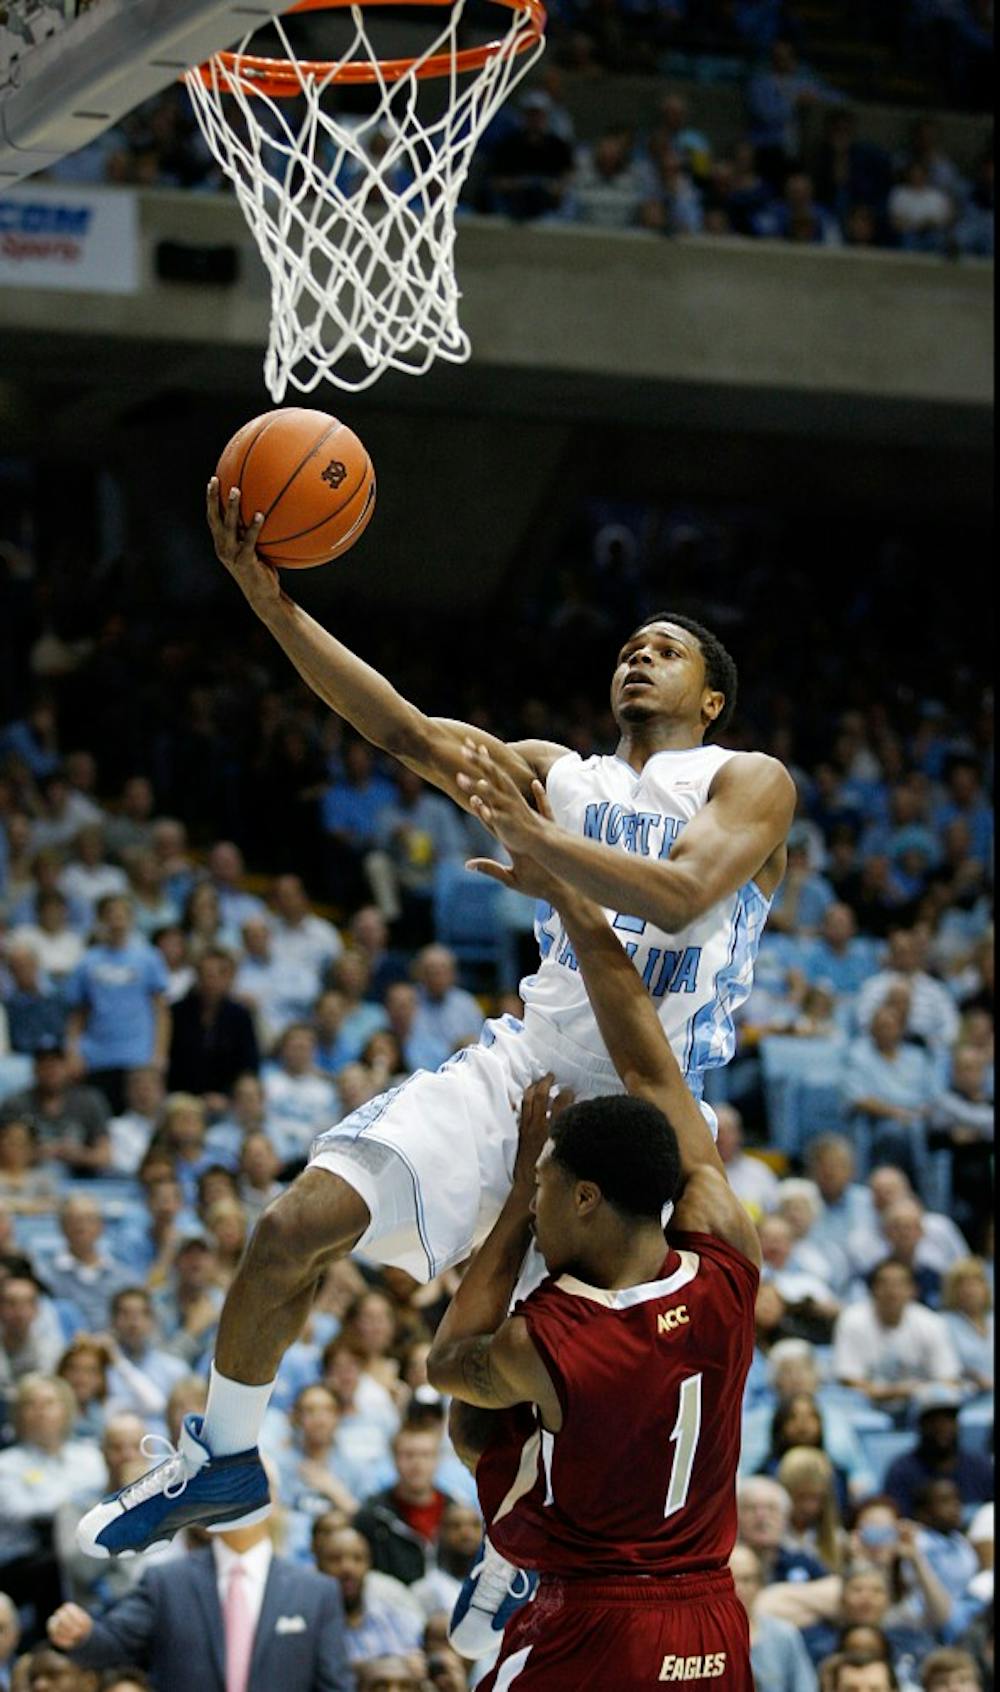 UNC guard Dexter Strickland drives to the hoop during the game against Boston College on Saturday. The Tar Heels defeated Boston College 83-60. 